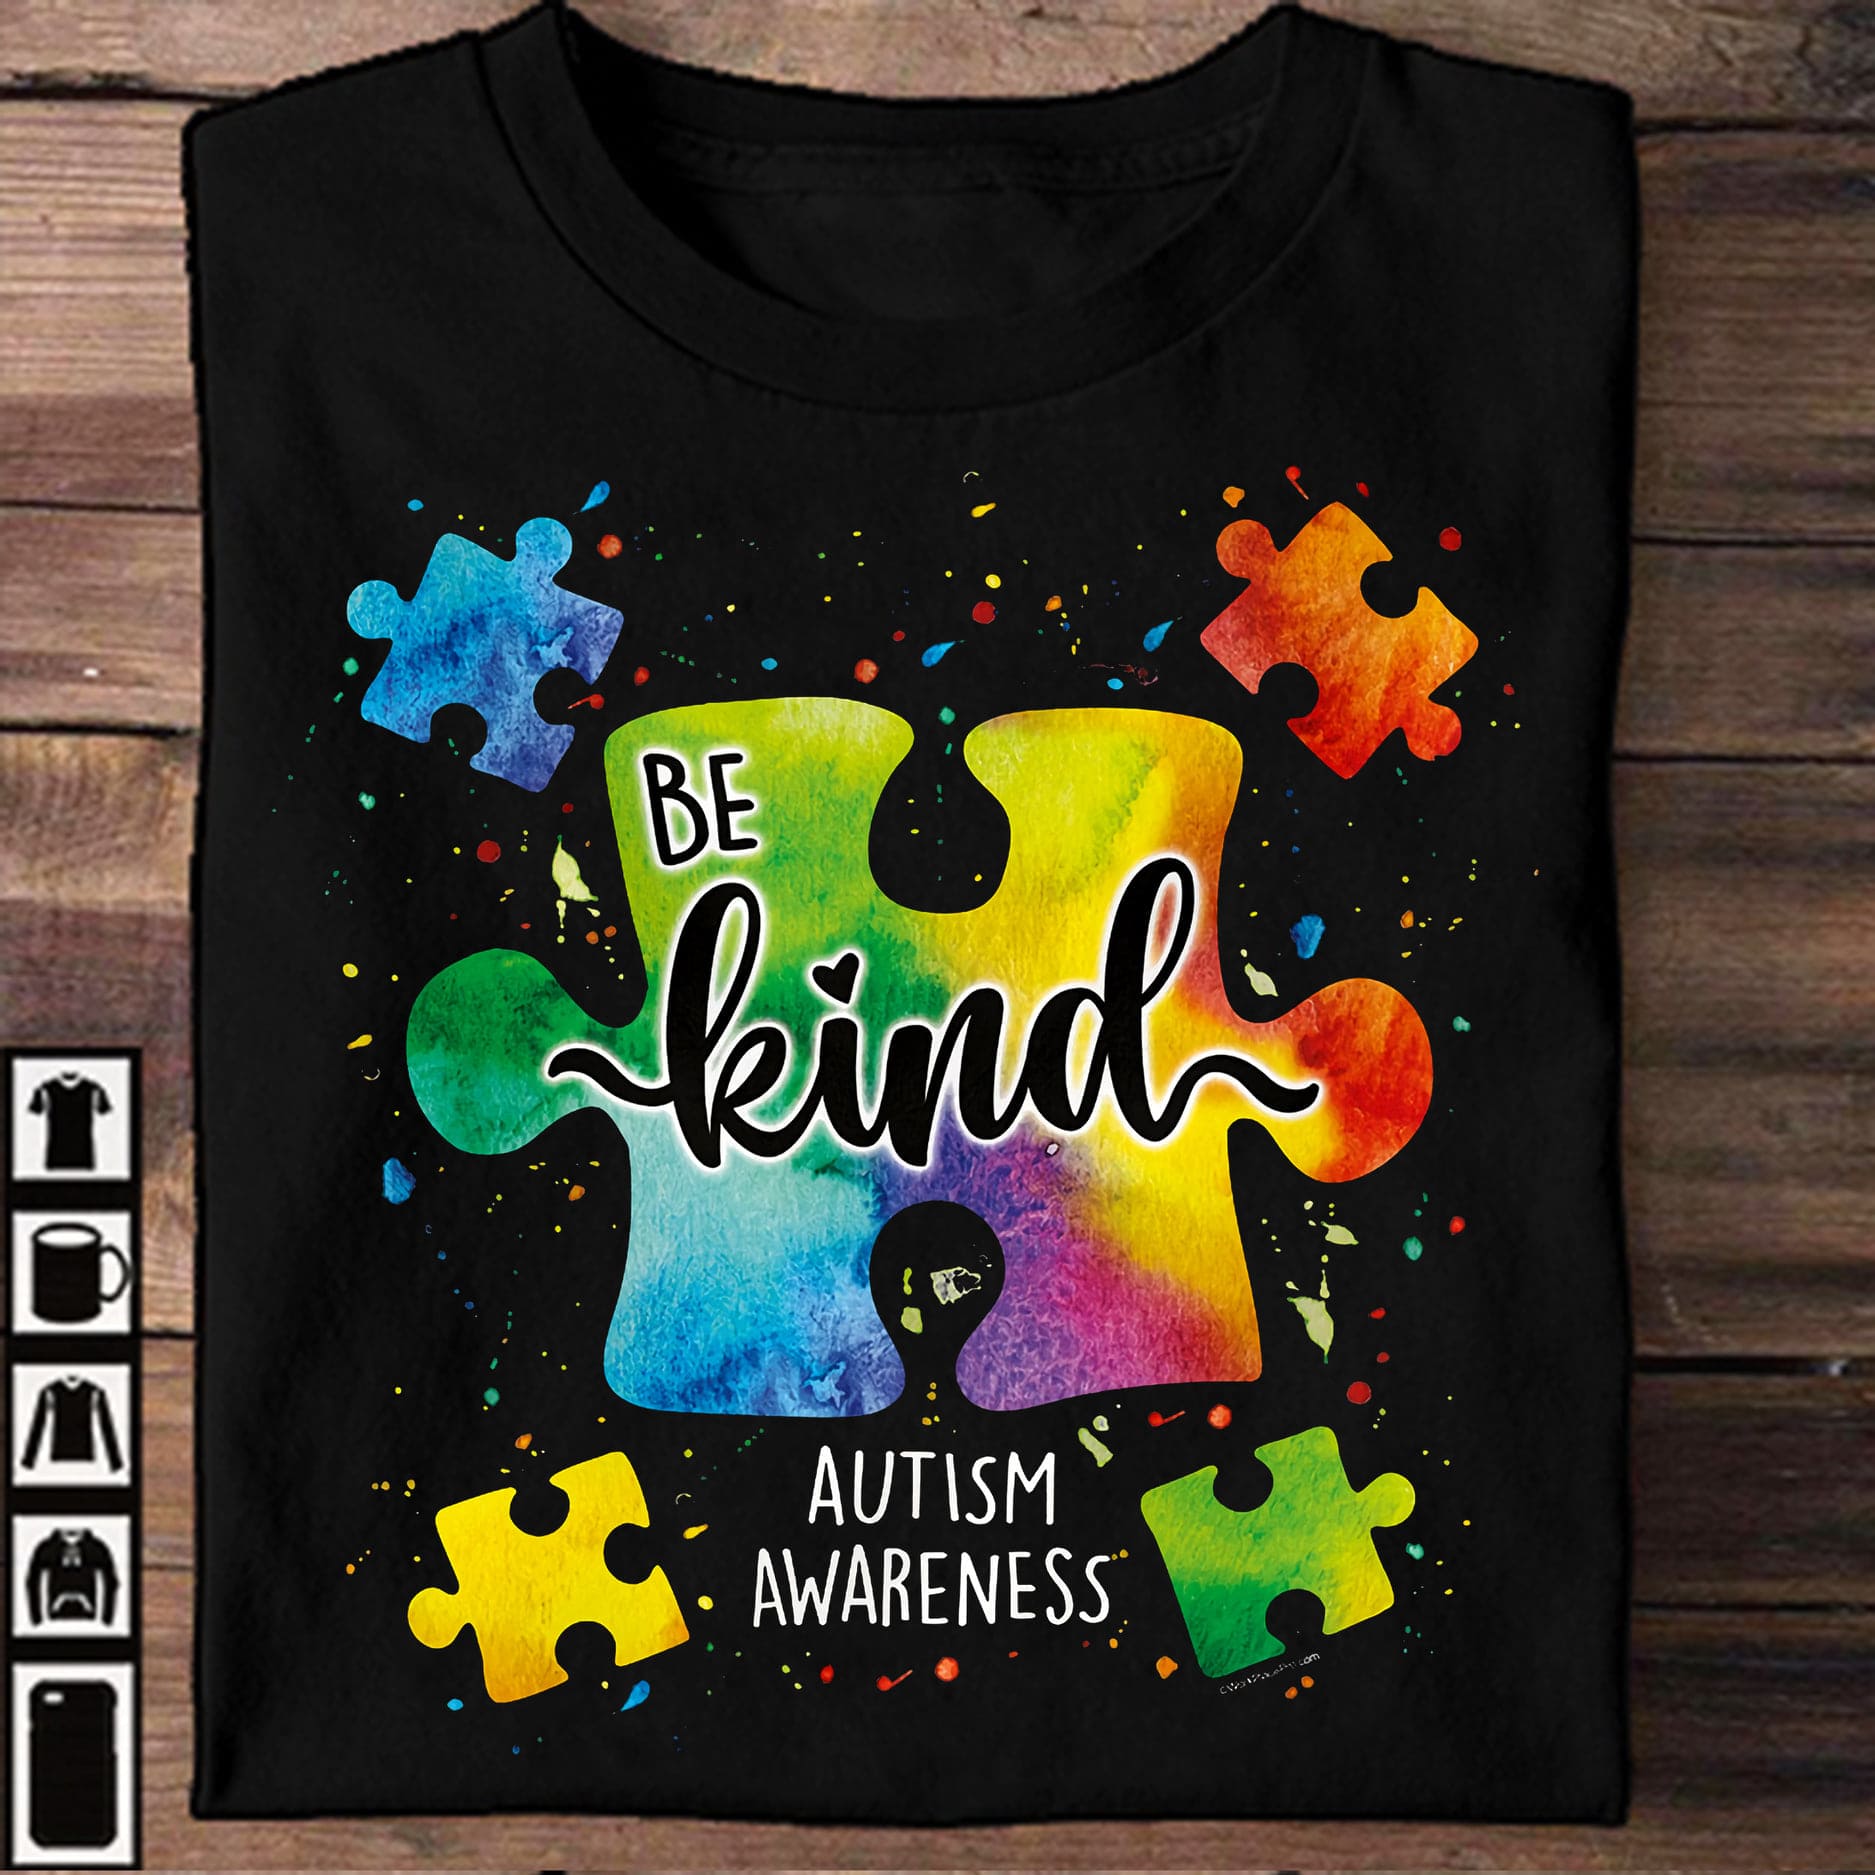 Be kind - Autism awareness, Be kind to autistic, spread kindness